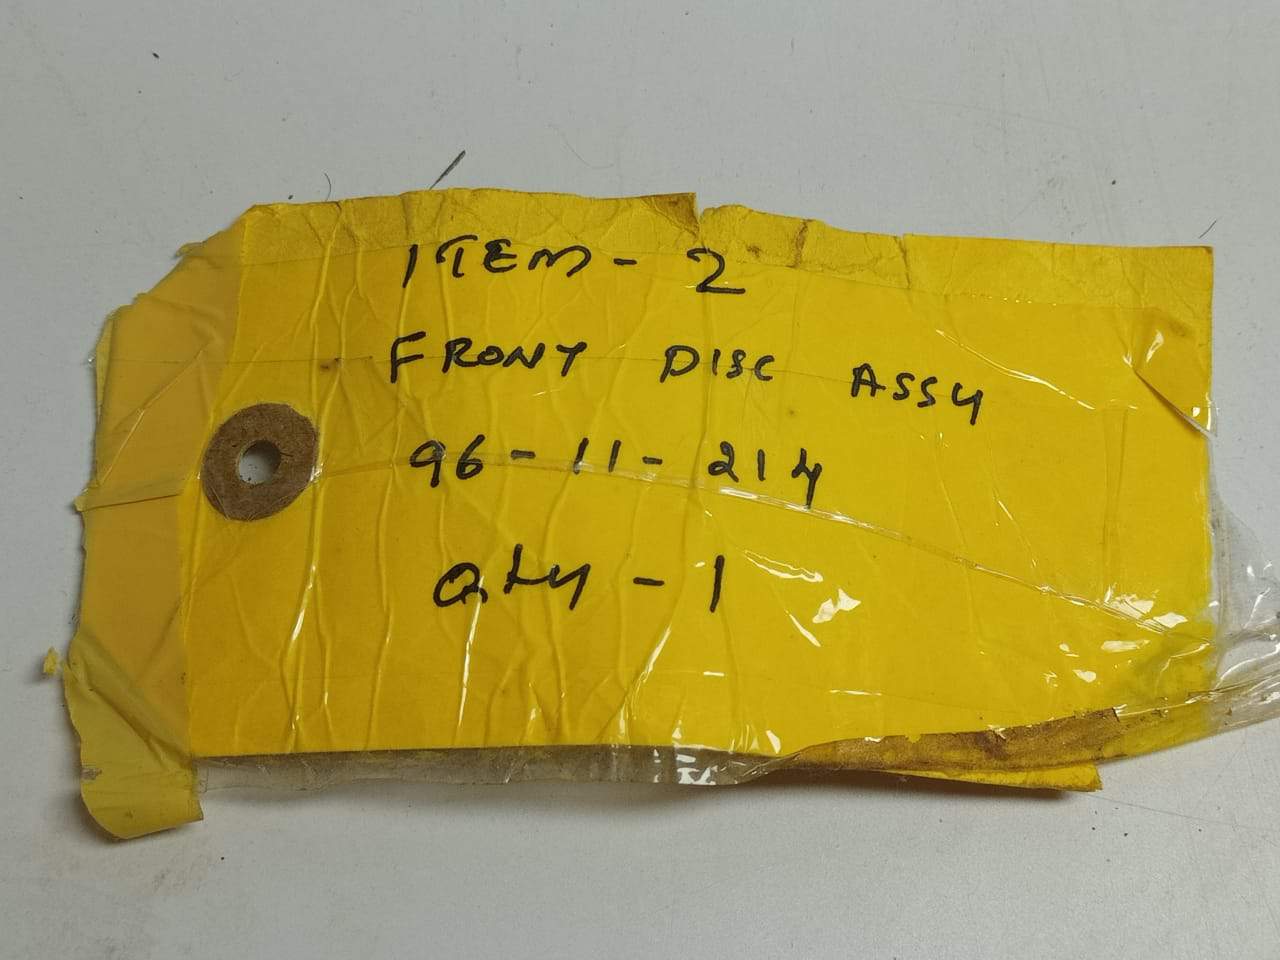 Front Disc Assembly 96-11-214